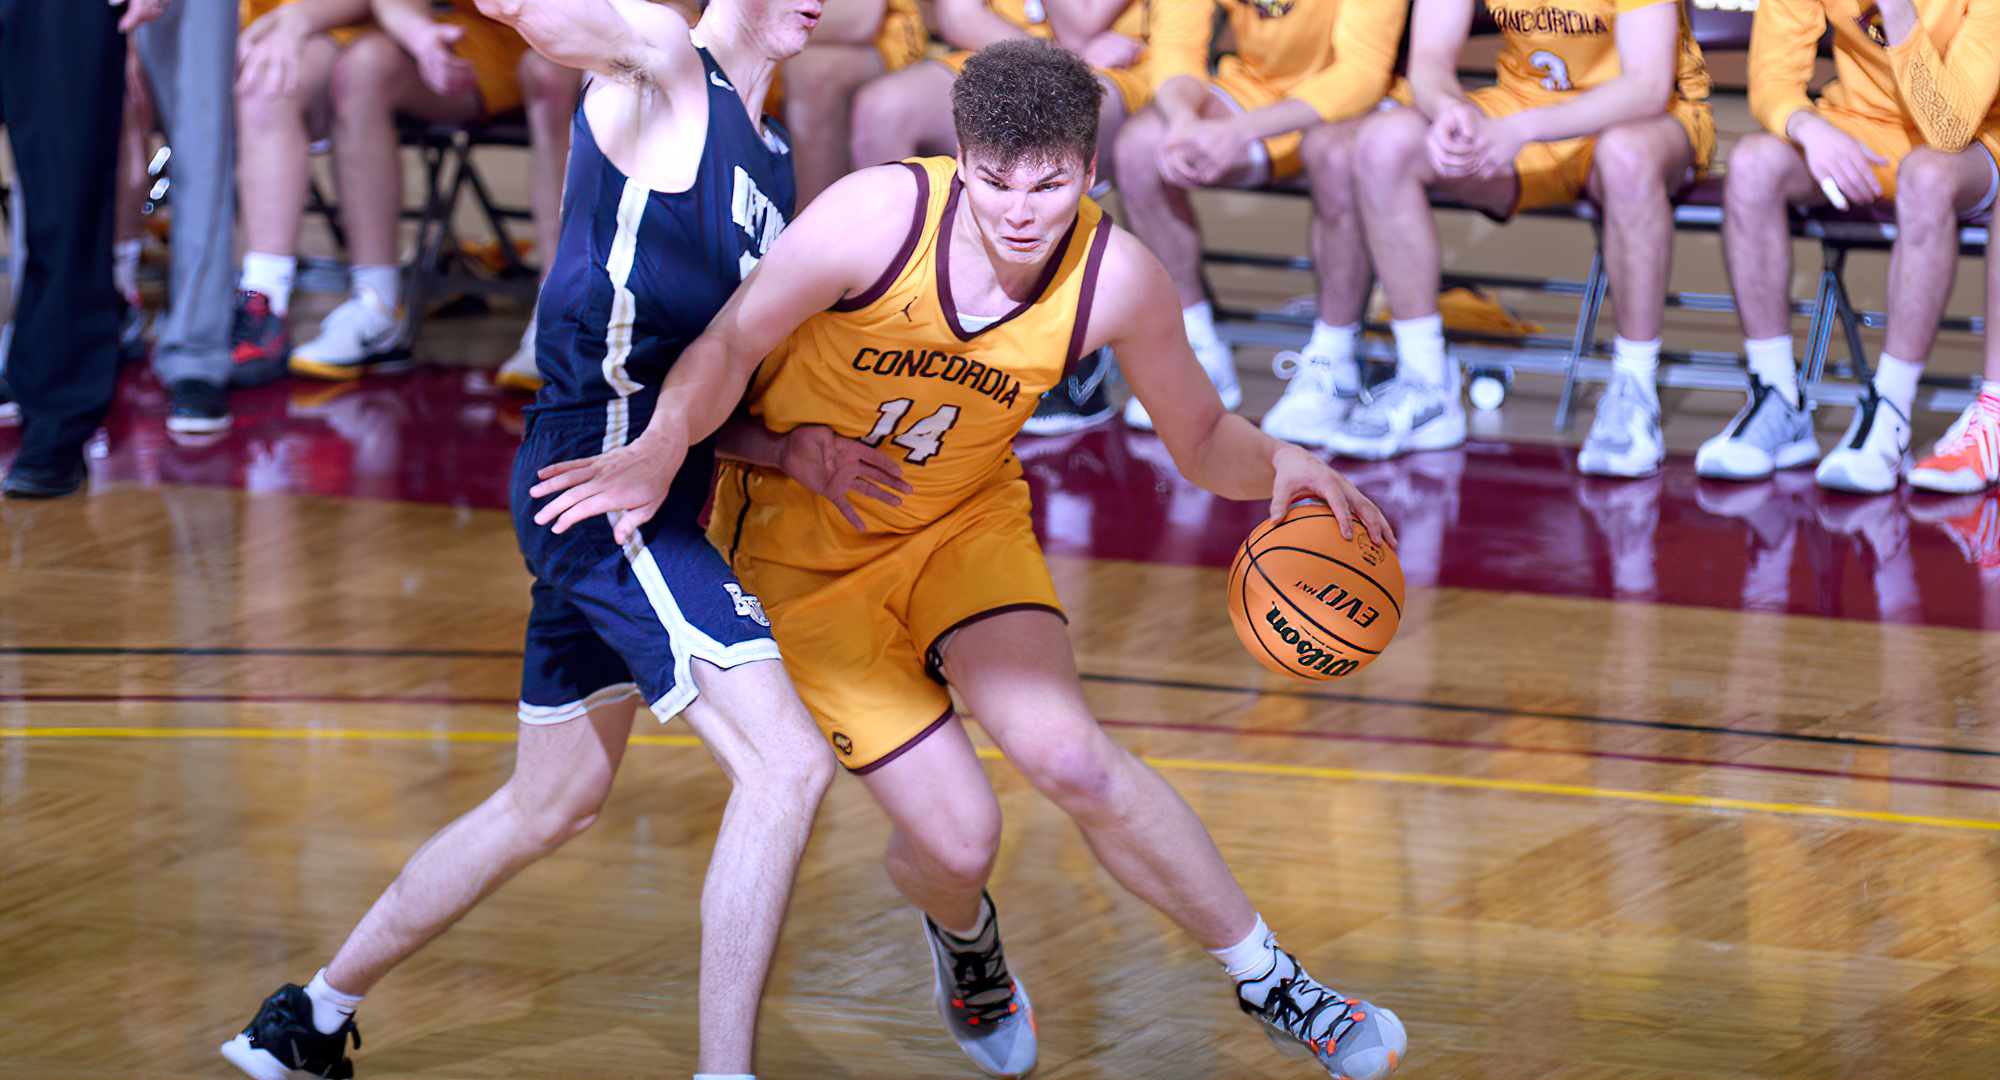 Freshman Rowan Nelson drives the baseline in the second half on his way to two of his 20 points in the Cobbers' game with Bethel